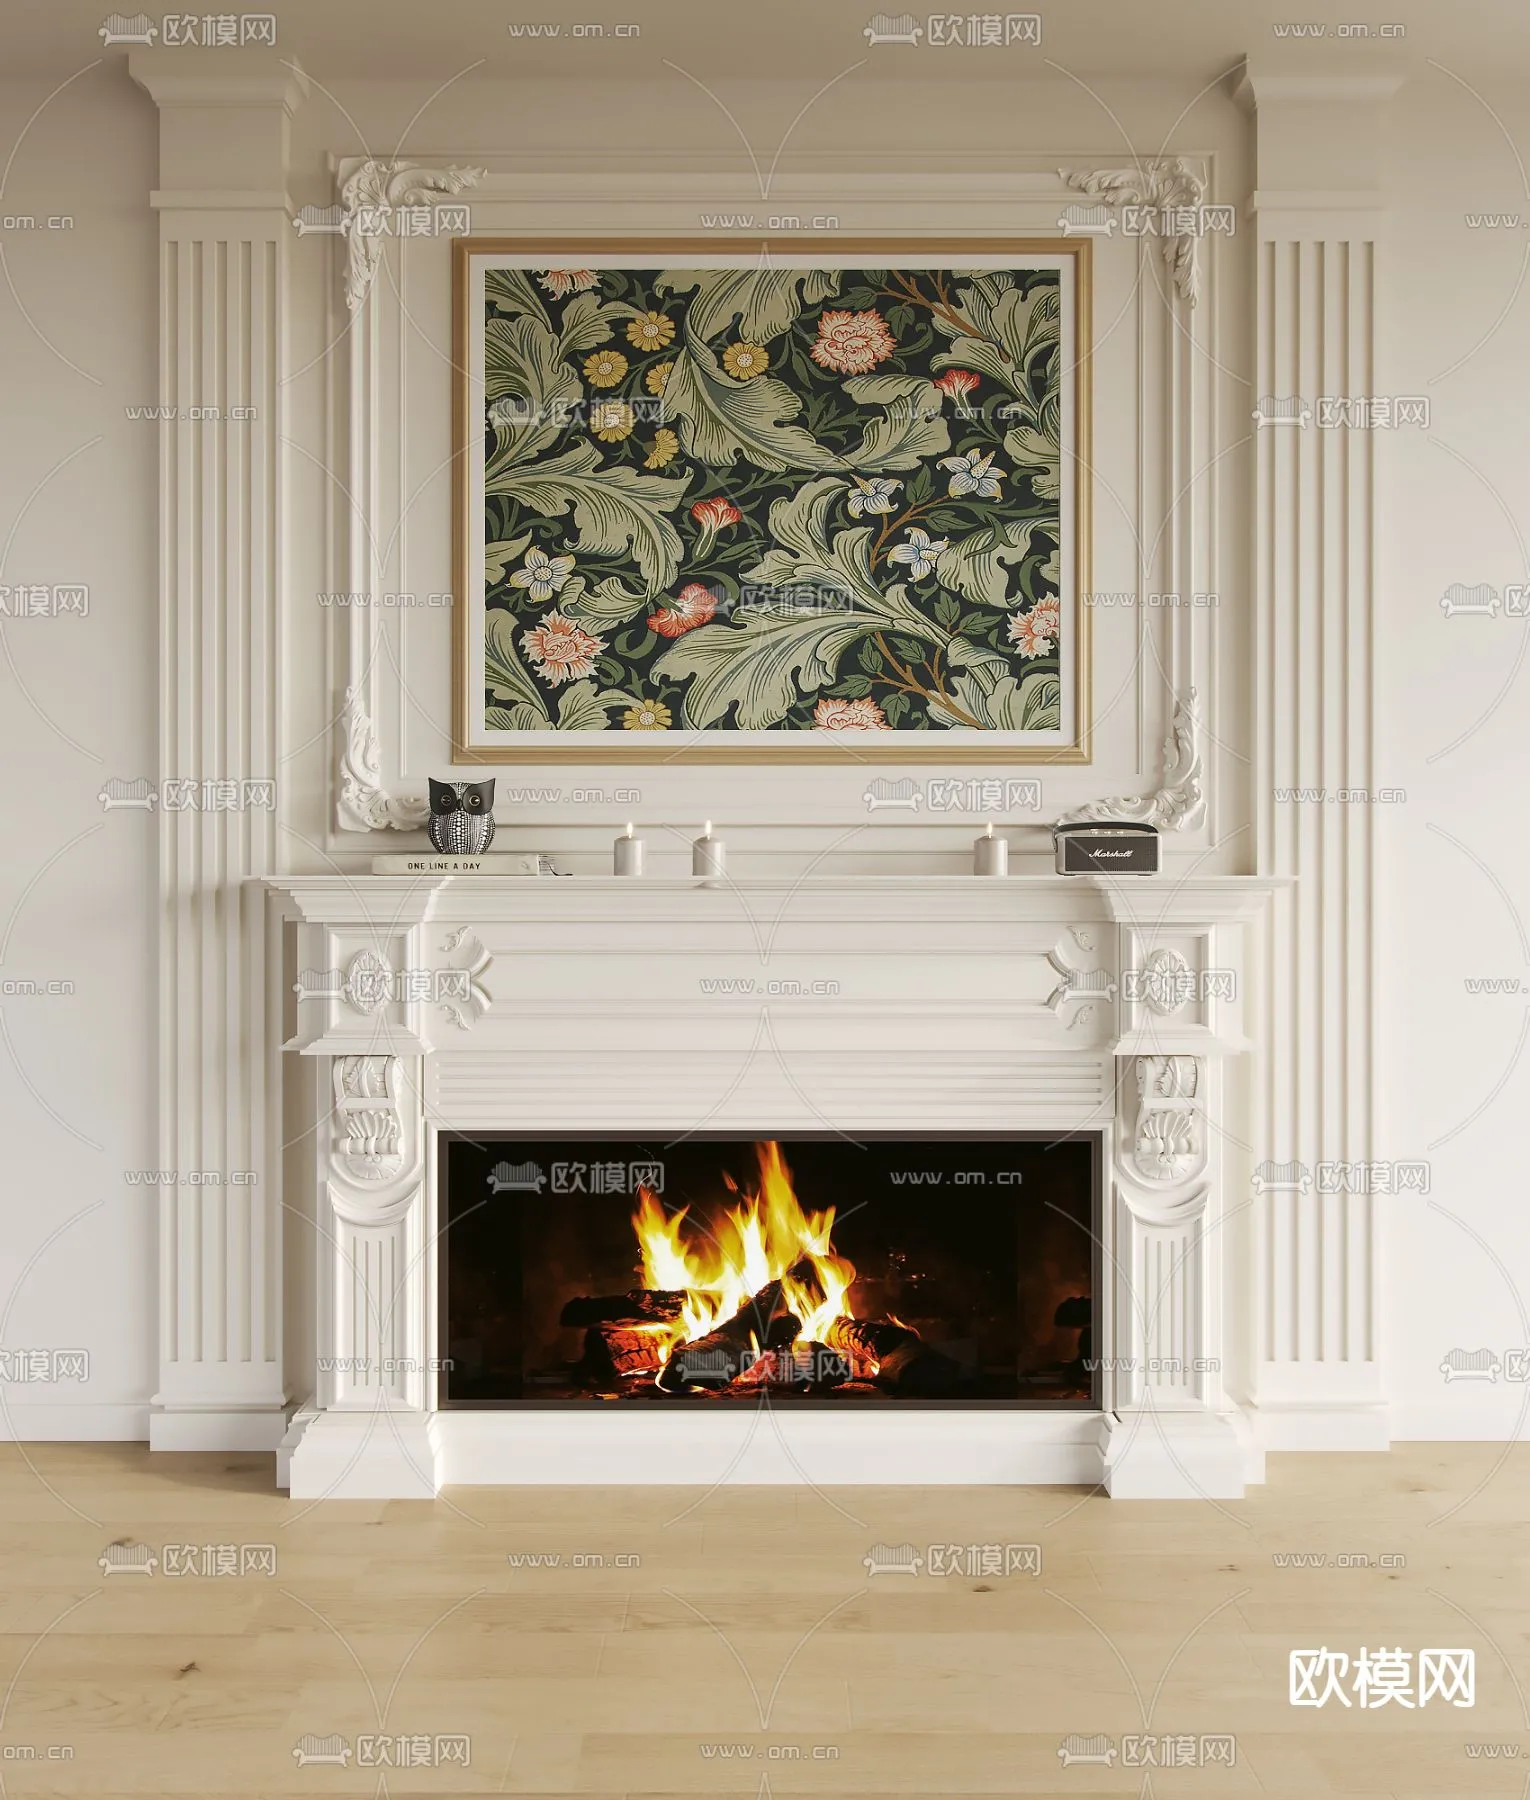 CLASSIC – FIREPLACE 3DMODELS – 080